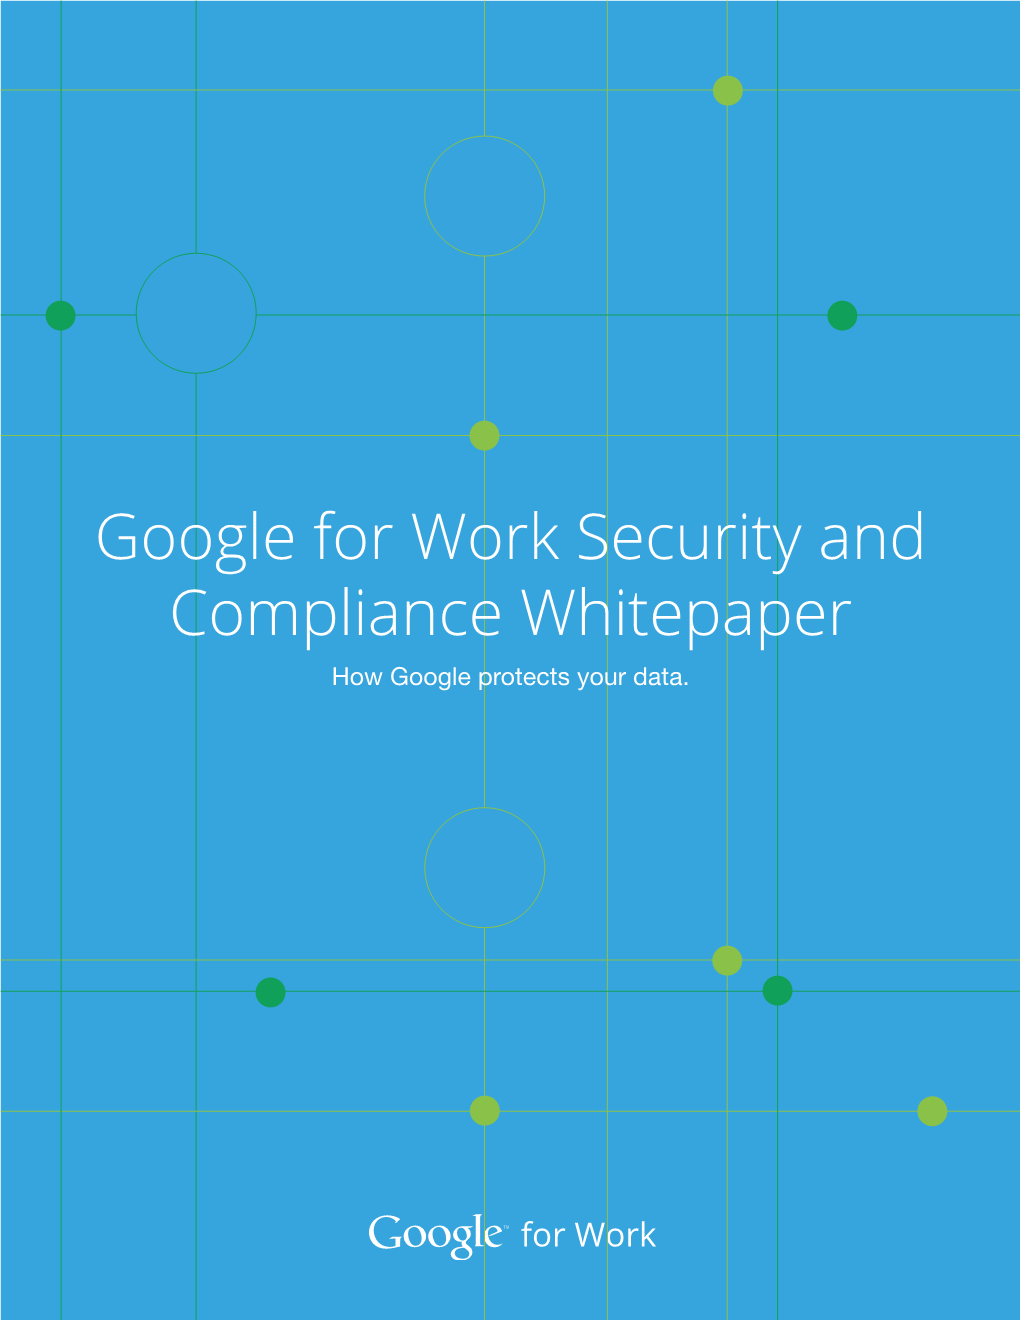 Google for Work Security and Compliance Whitepaper How Google Protects Your Data